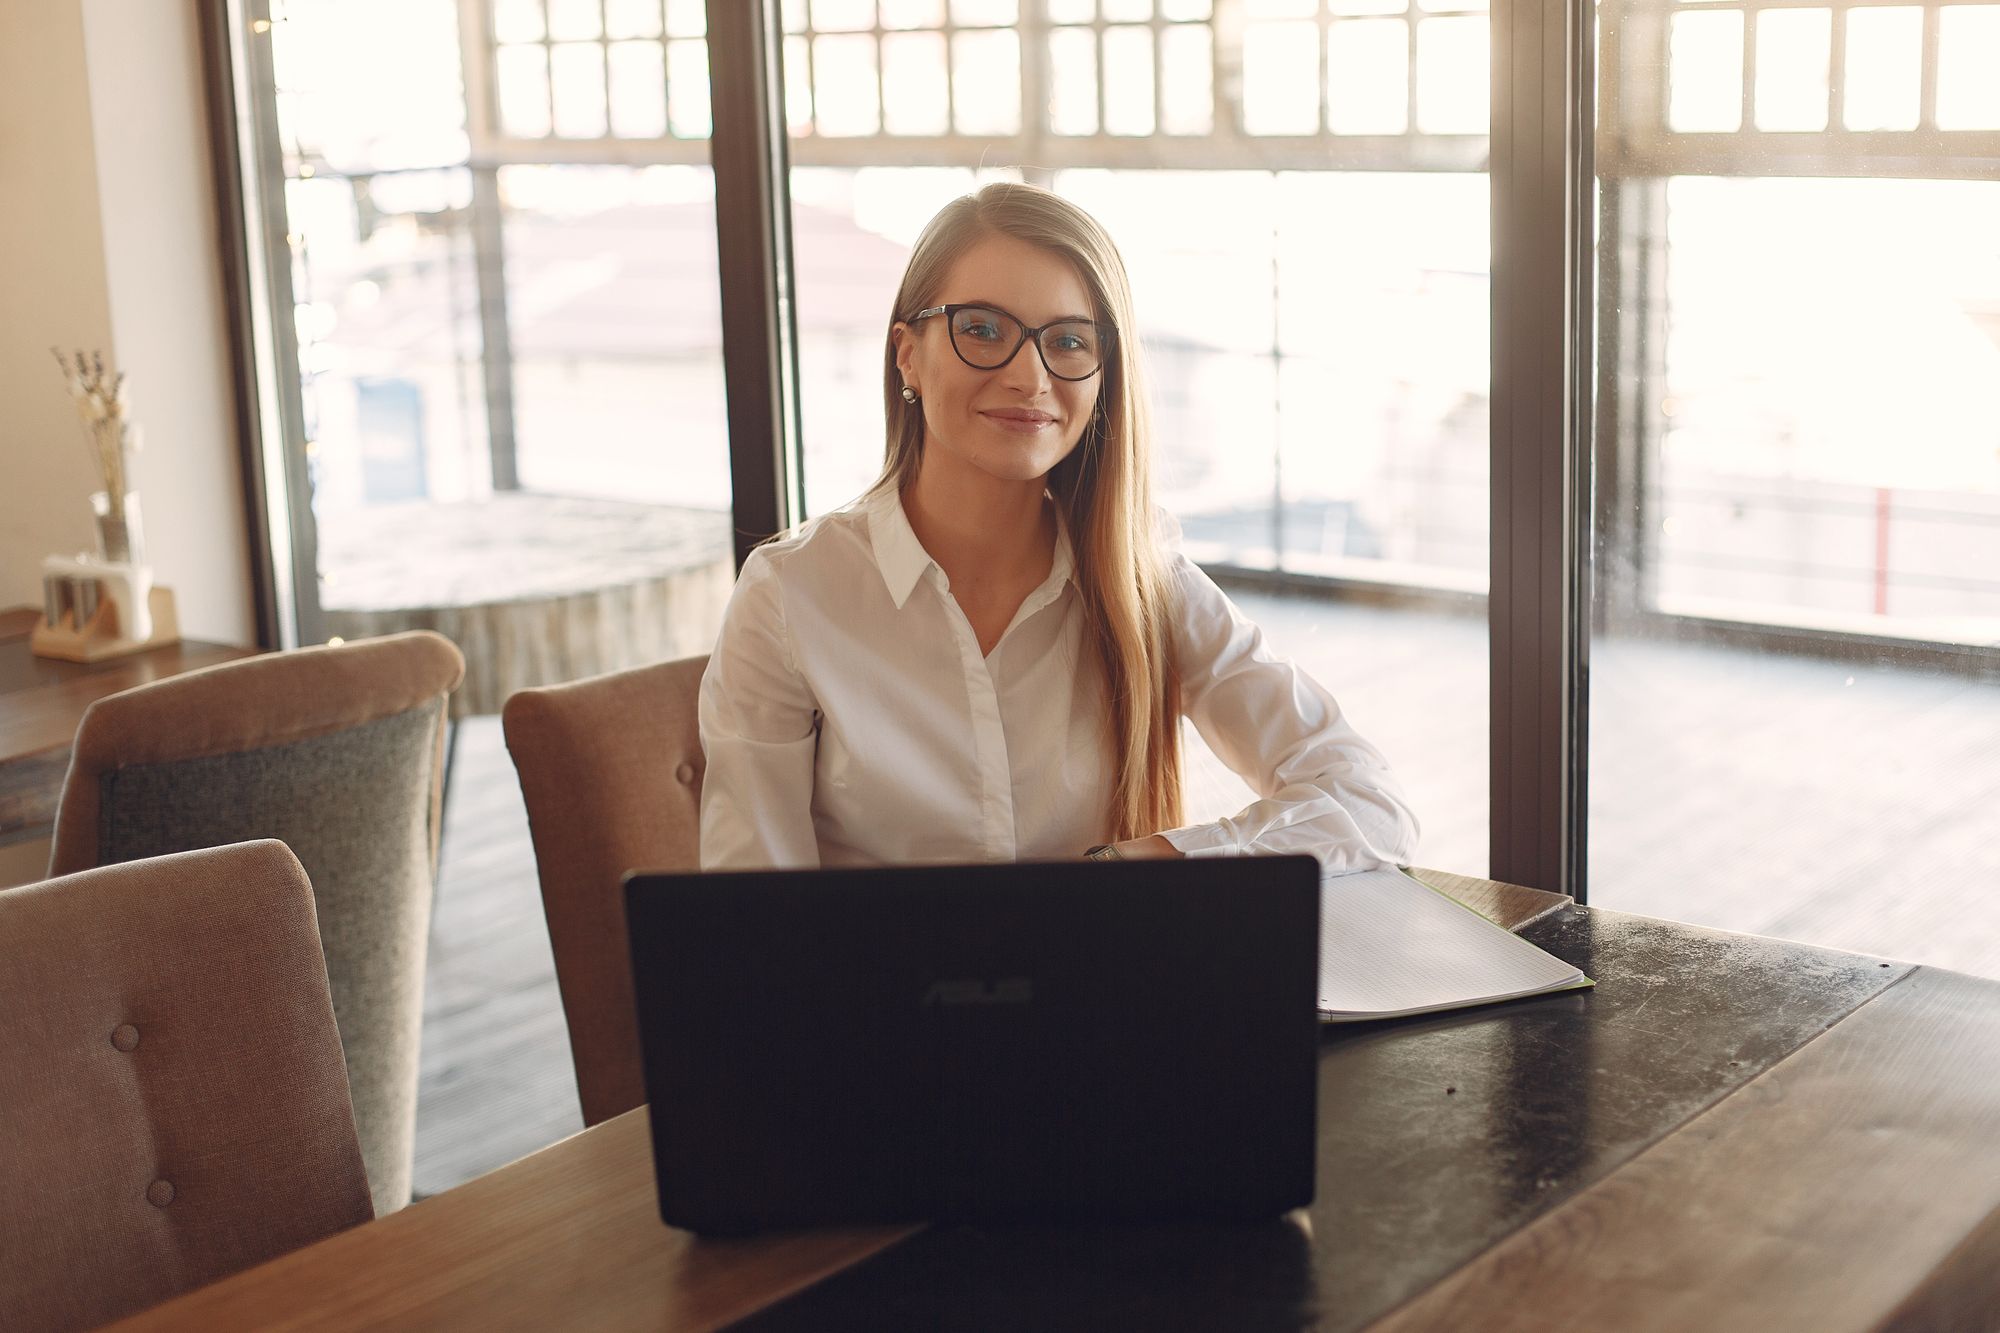 Building a Remote Workforce: Look For These Key Qualities in Candidates